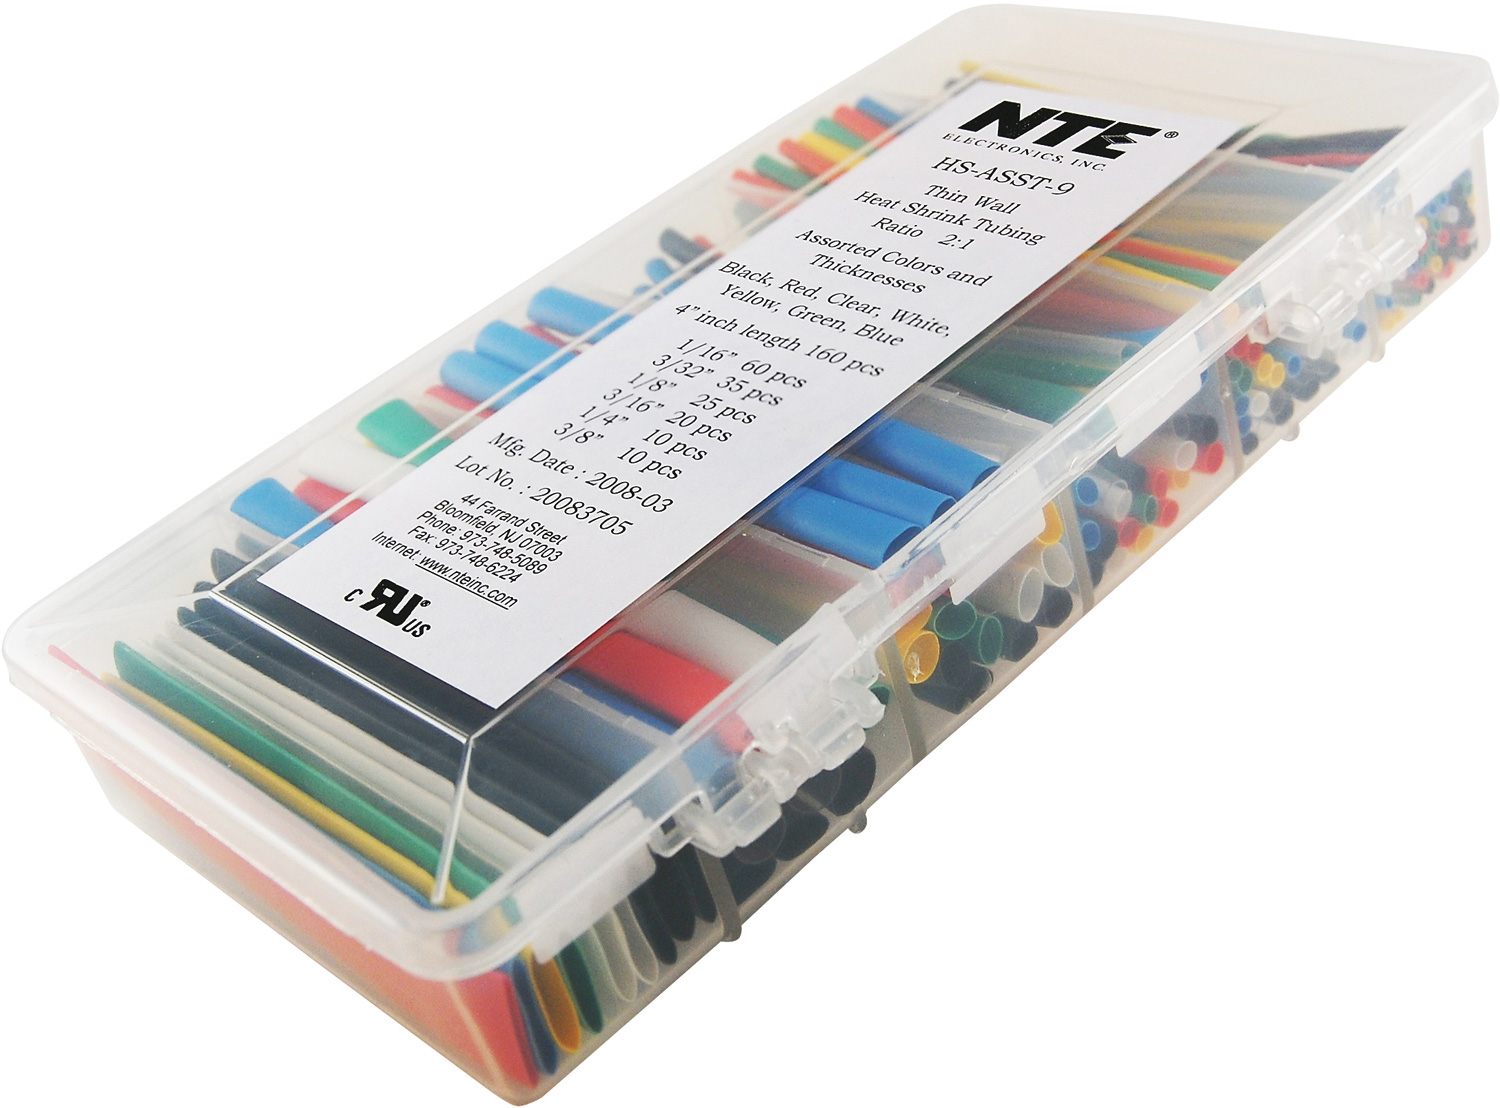 Nte Hs Asst 9 Master Heat Shrink 160 Piece 4 Inch 2 To 1 Shrink Tubing Kit Assorted Colors